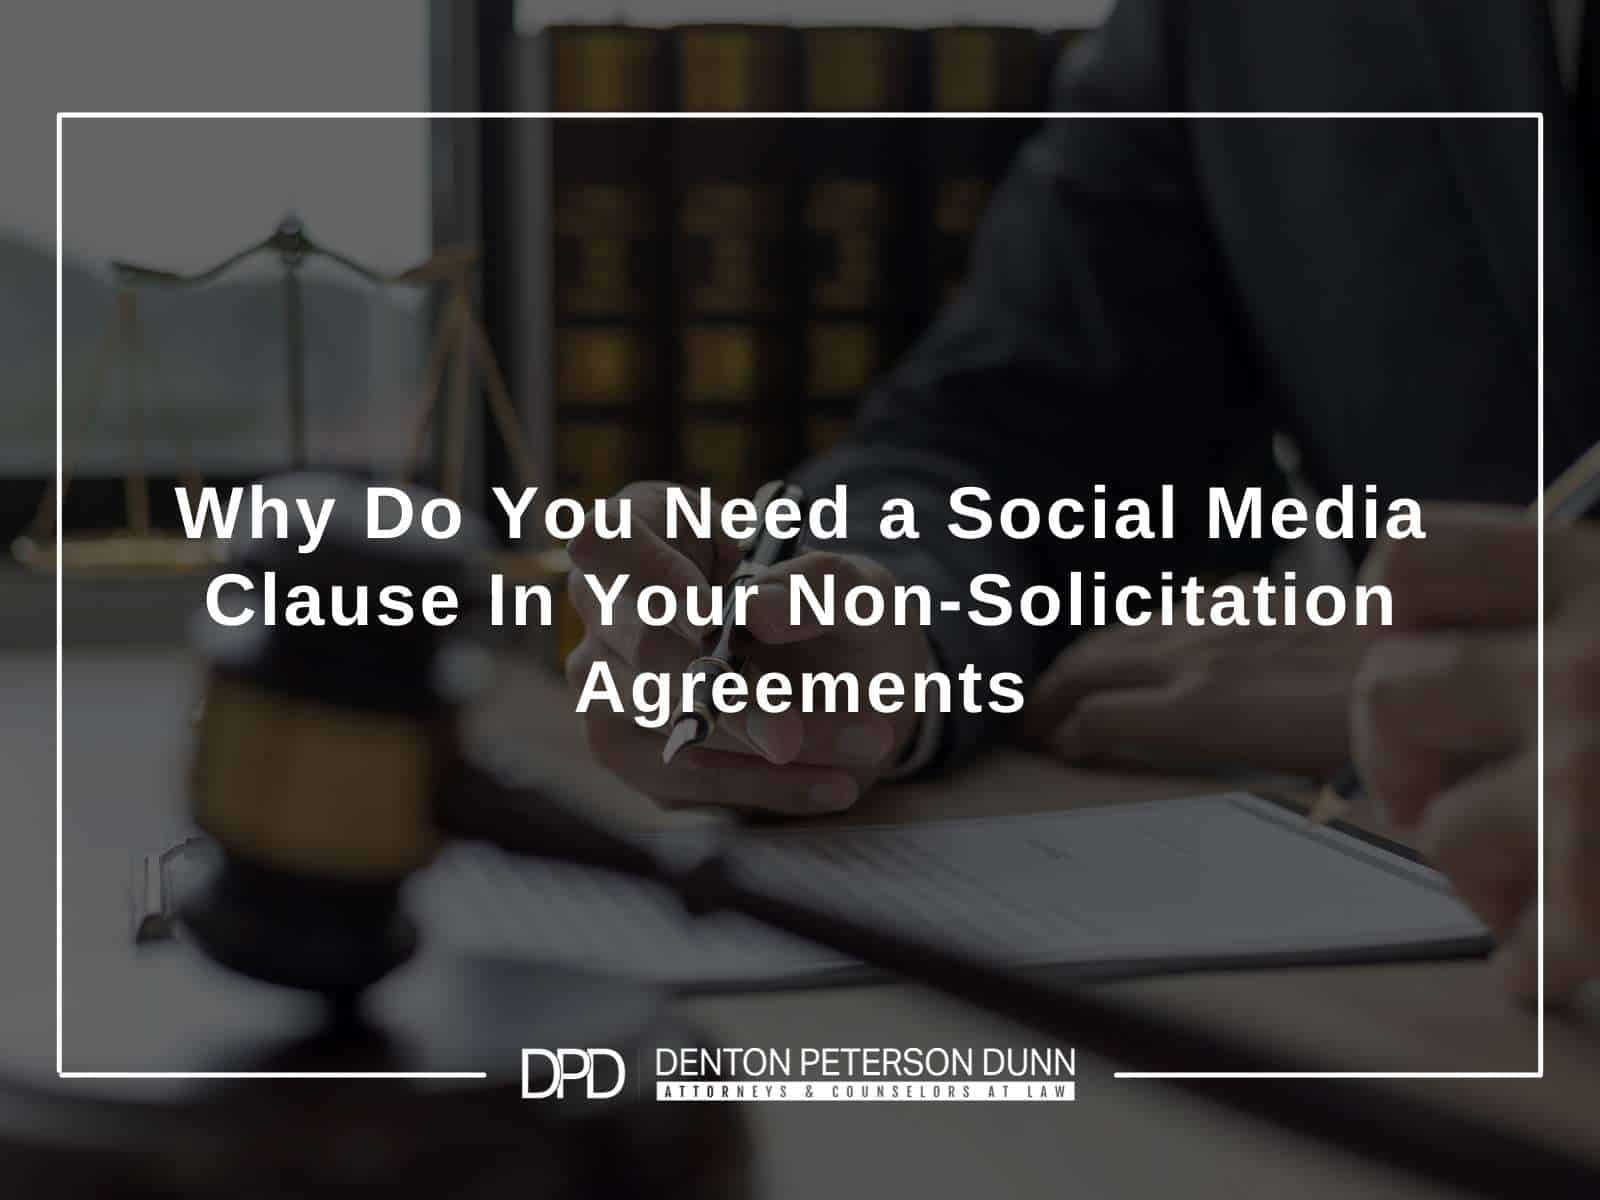 Why Do You Need a Social Media Clause In Your Non-Solicitation Agreements